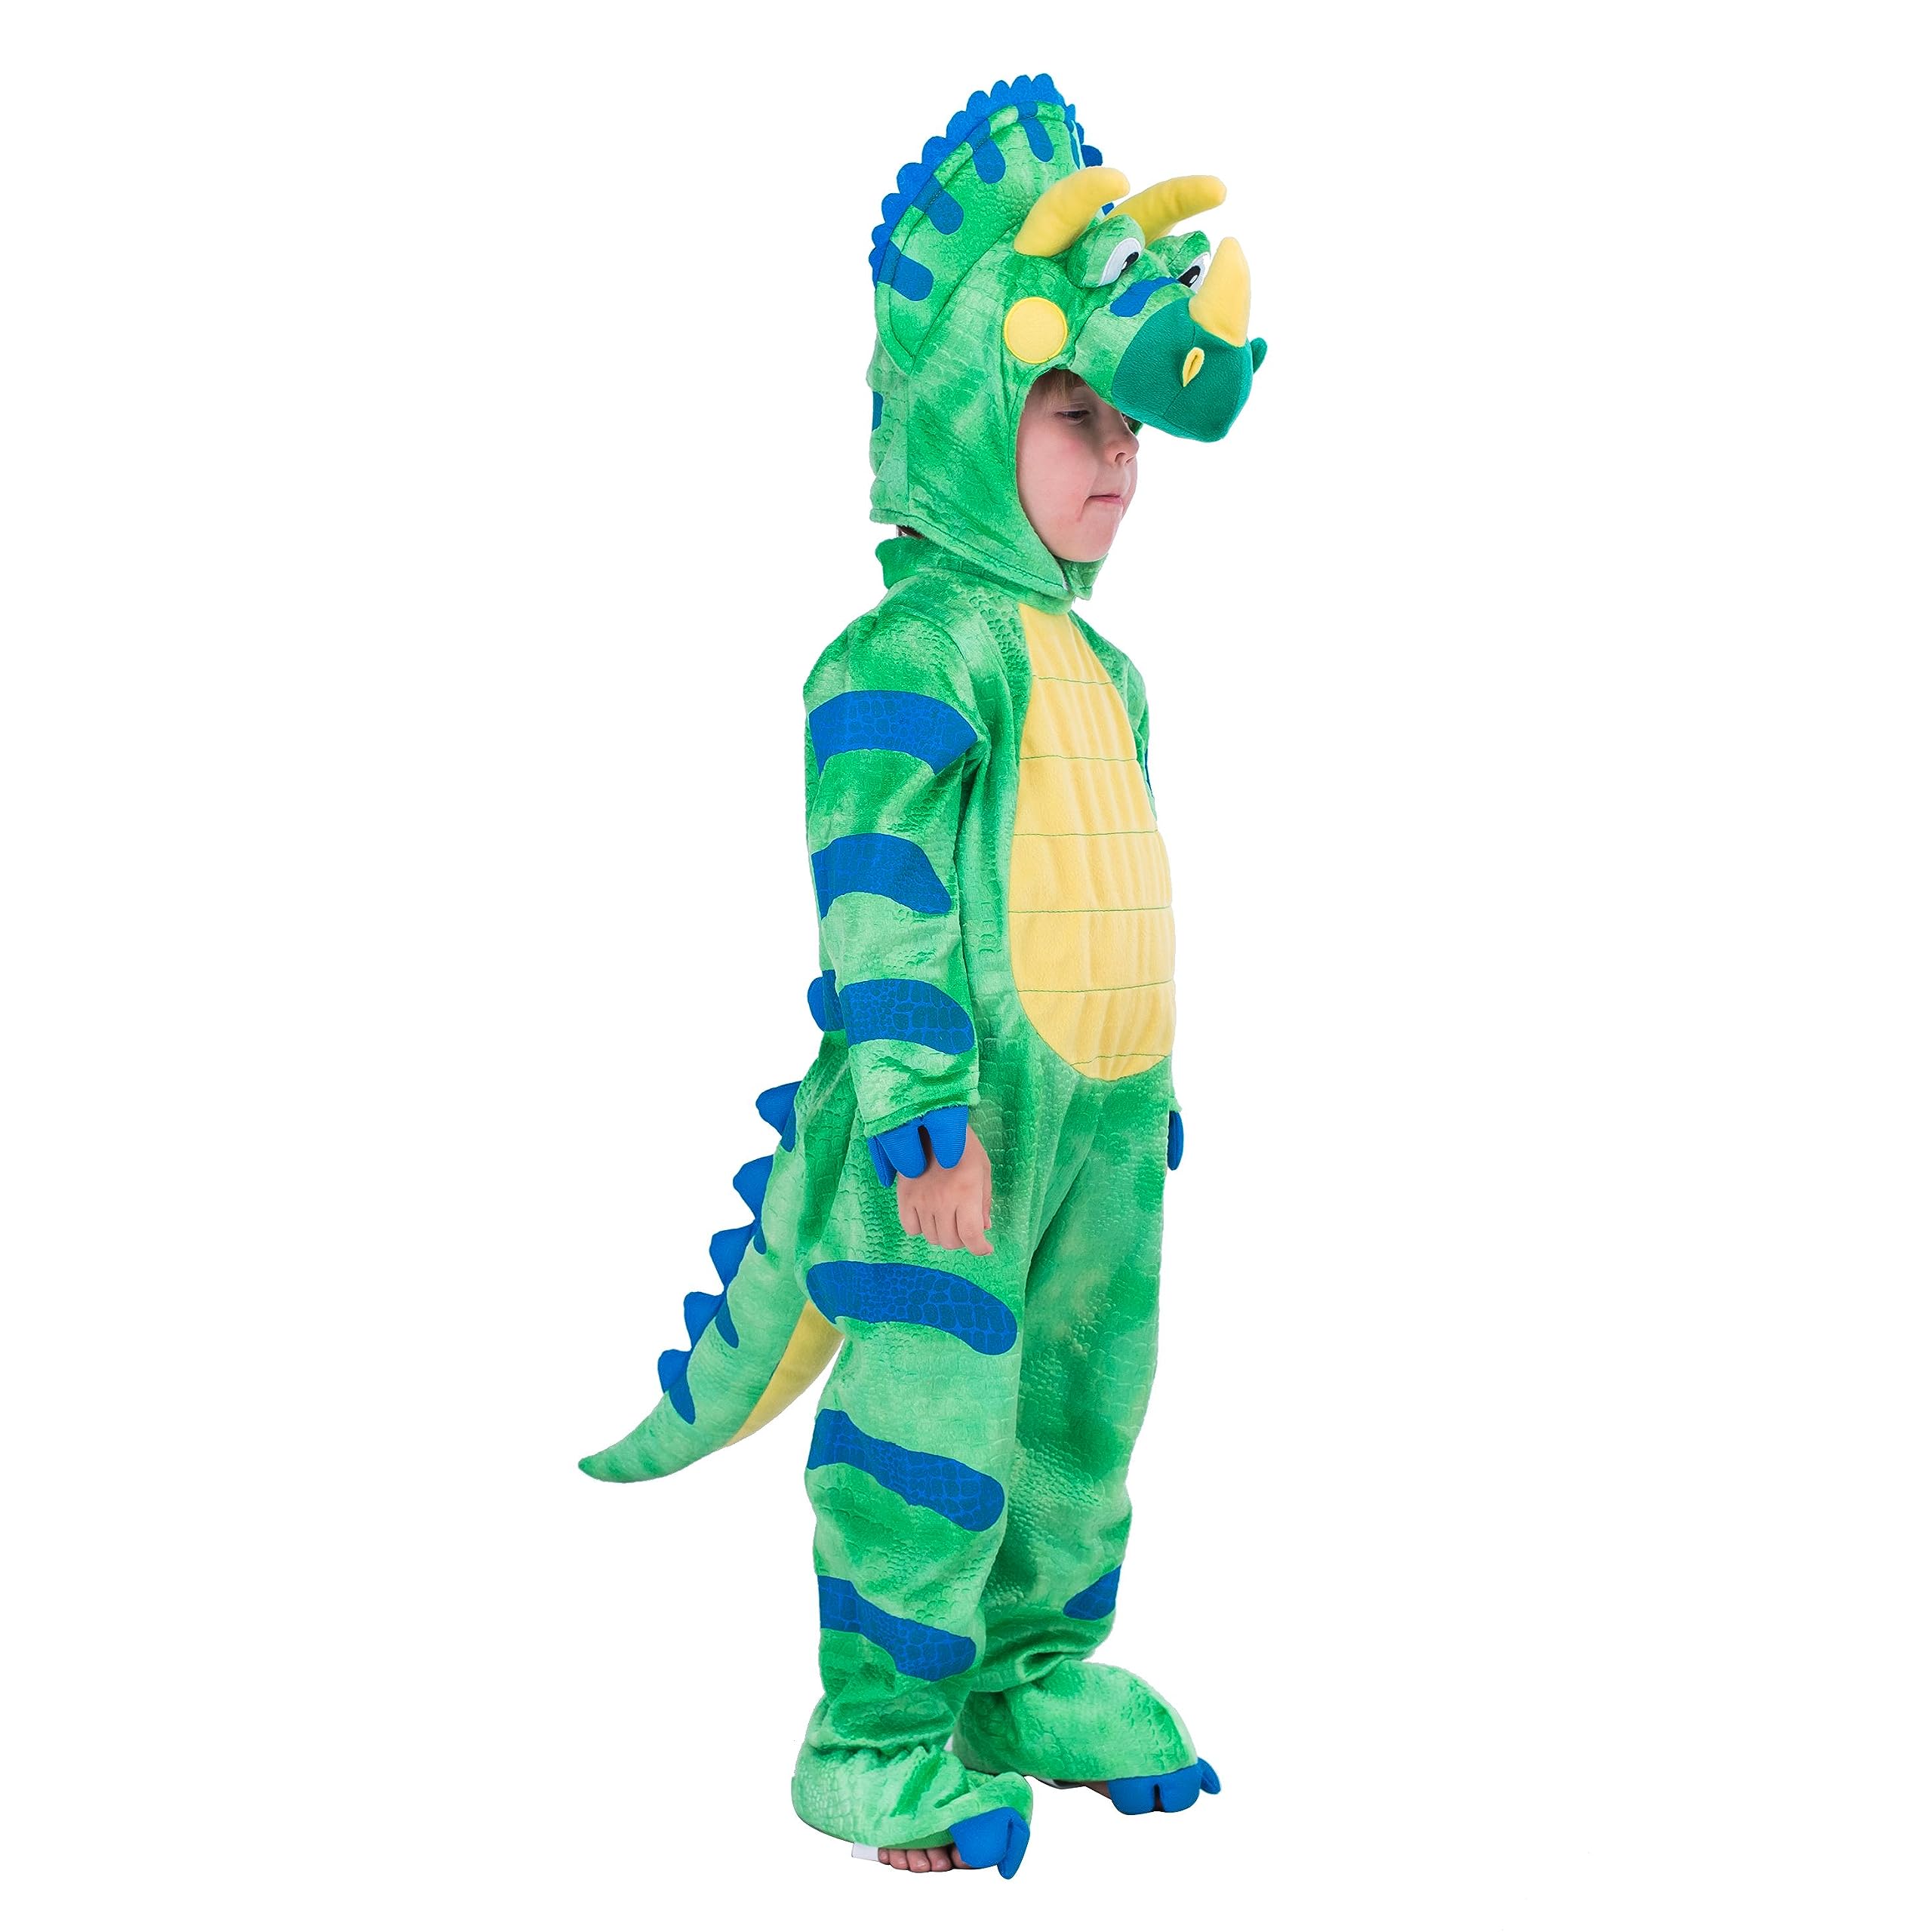 Spooktacular Creations Green Triceratops Dinosaur Costume with Toy Egg for Kid Halloween Dress Up Dino Themed Pretend Party (3T (3-4 yrs))